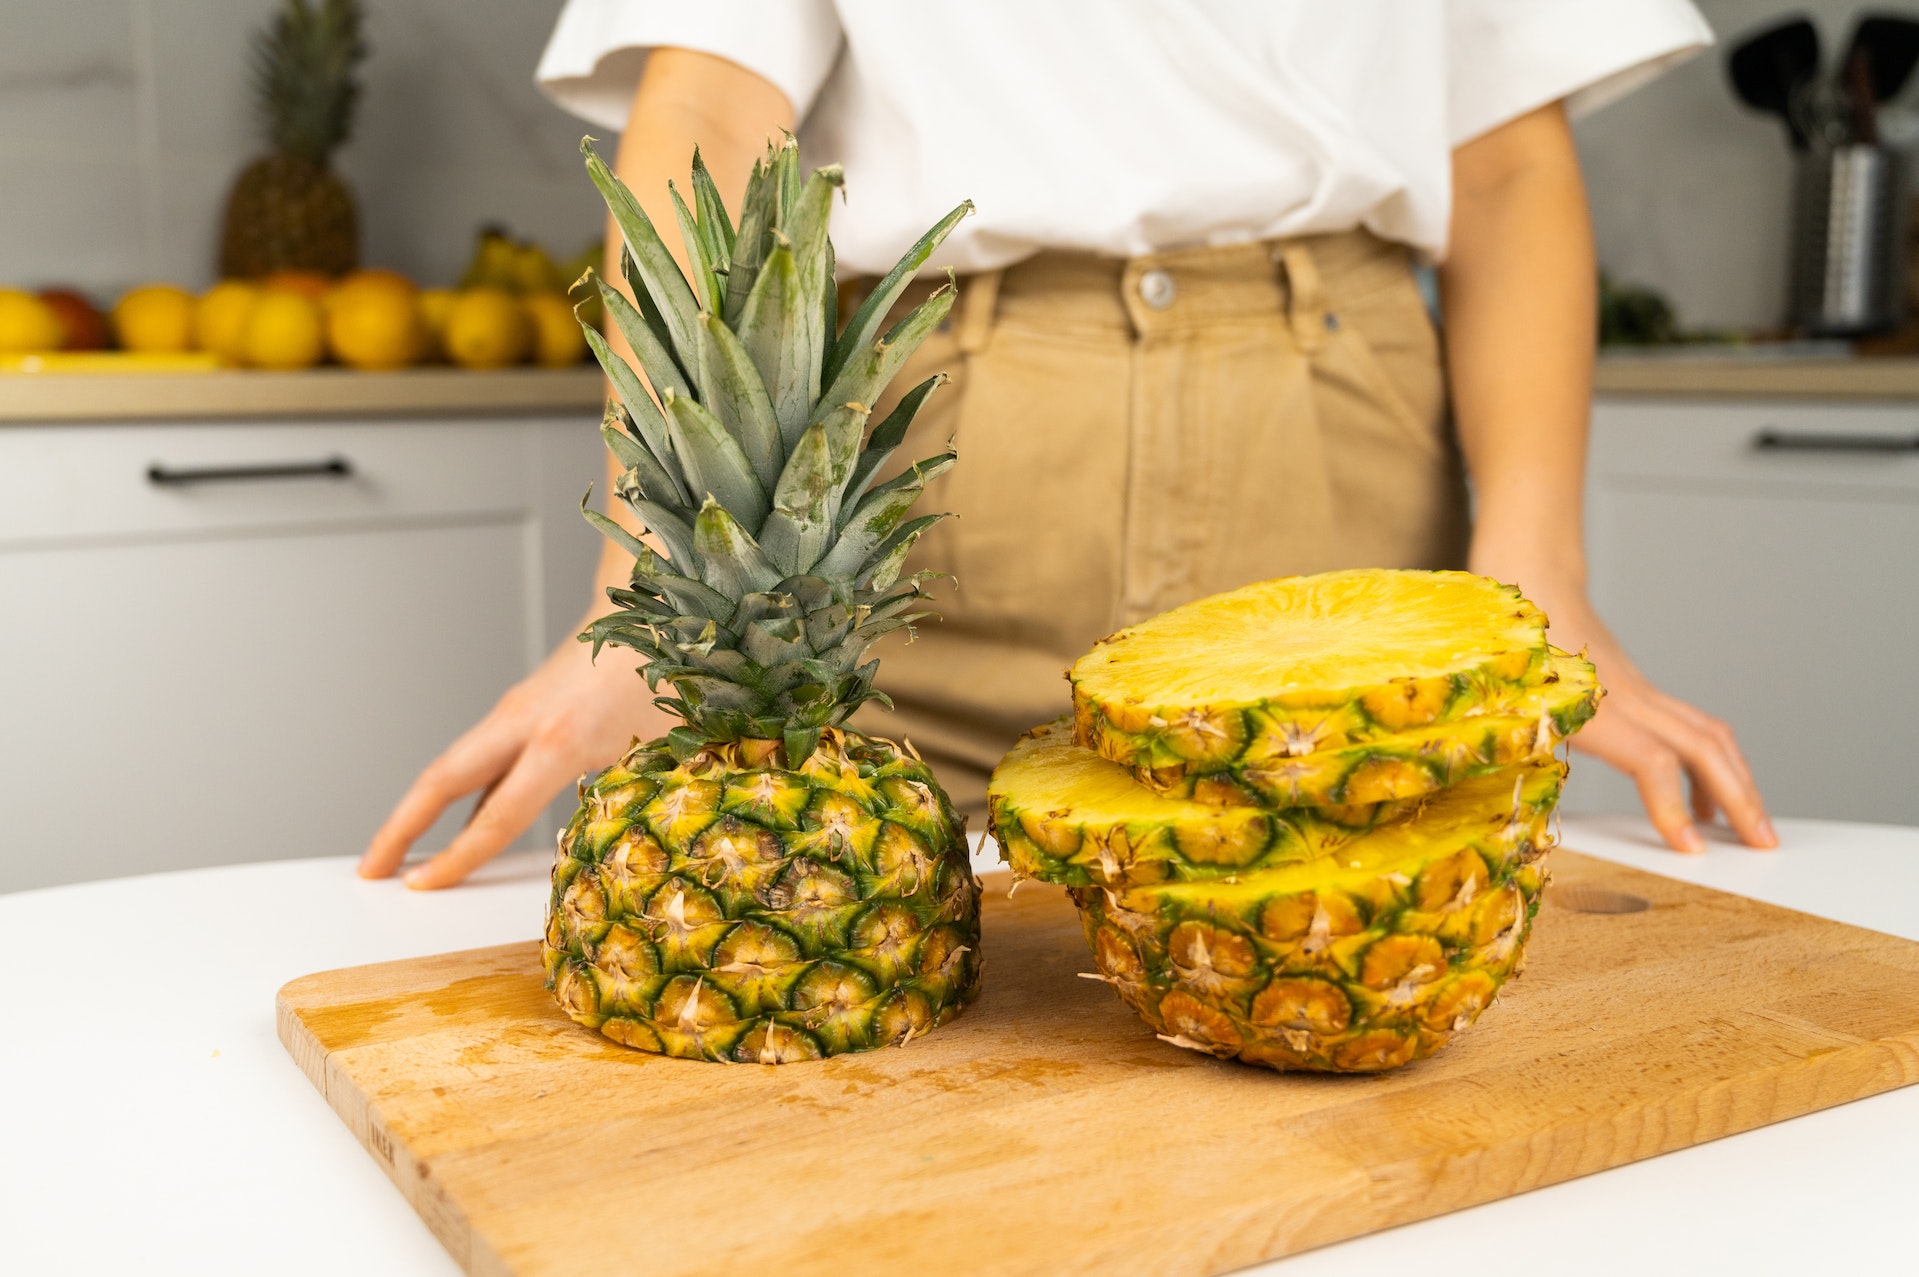 How to cut pineapple